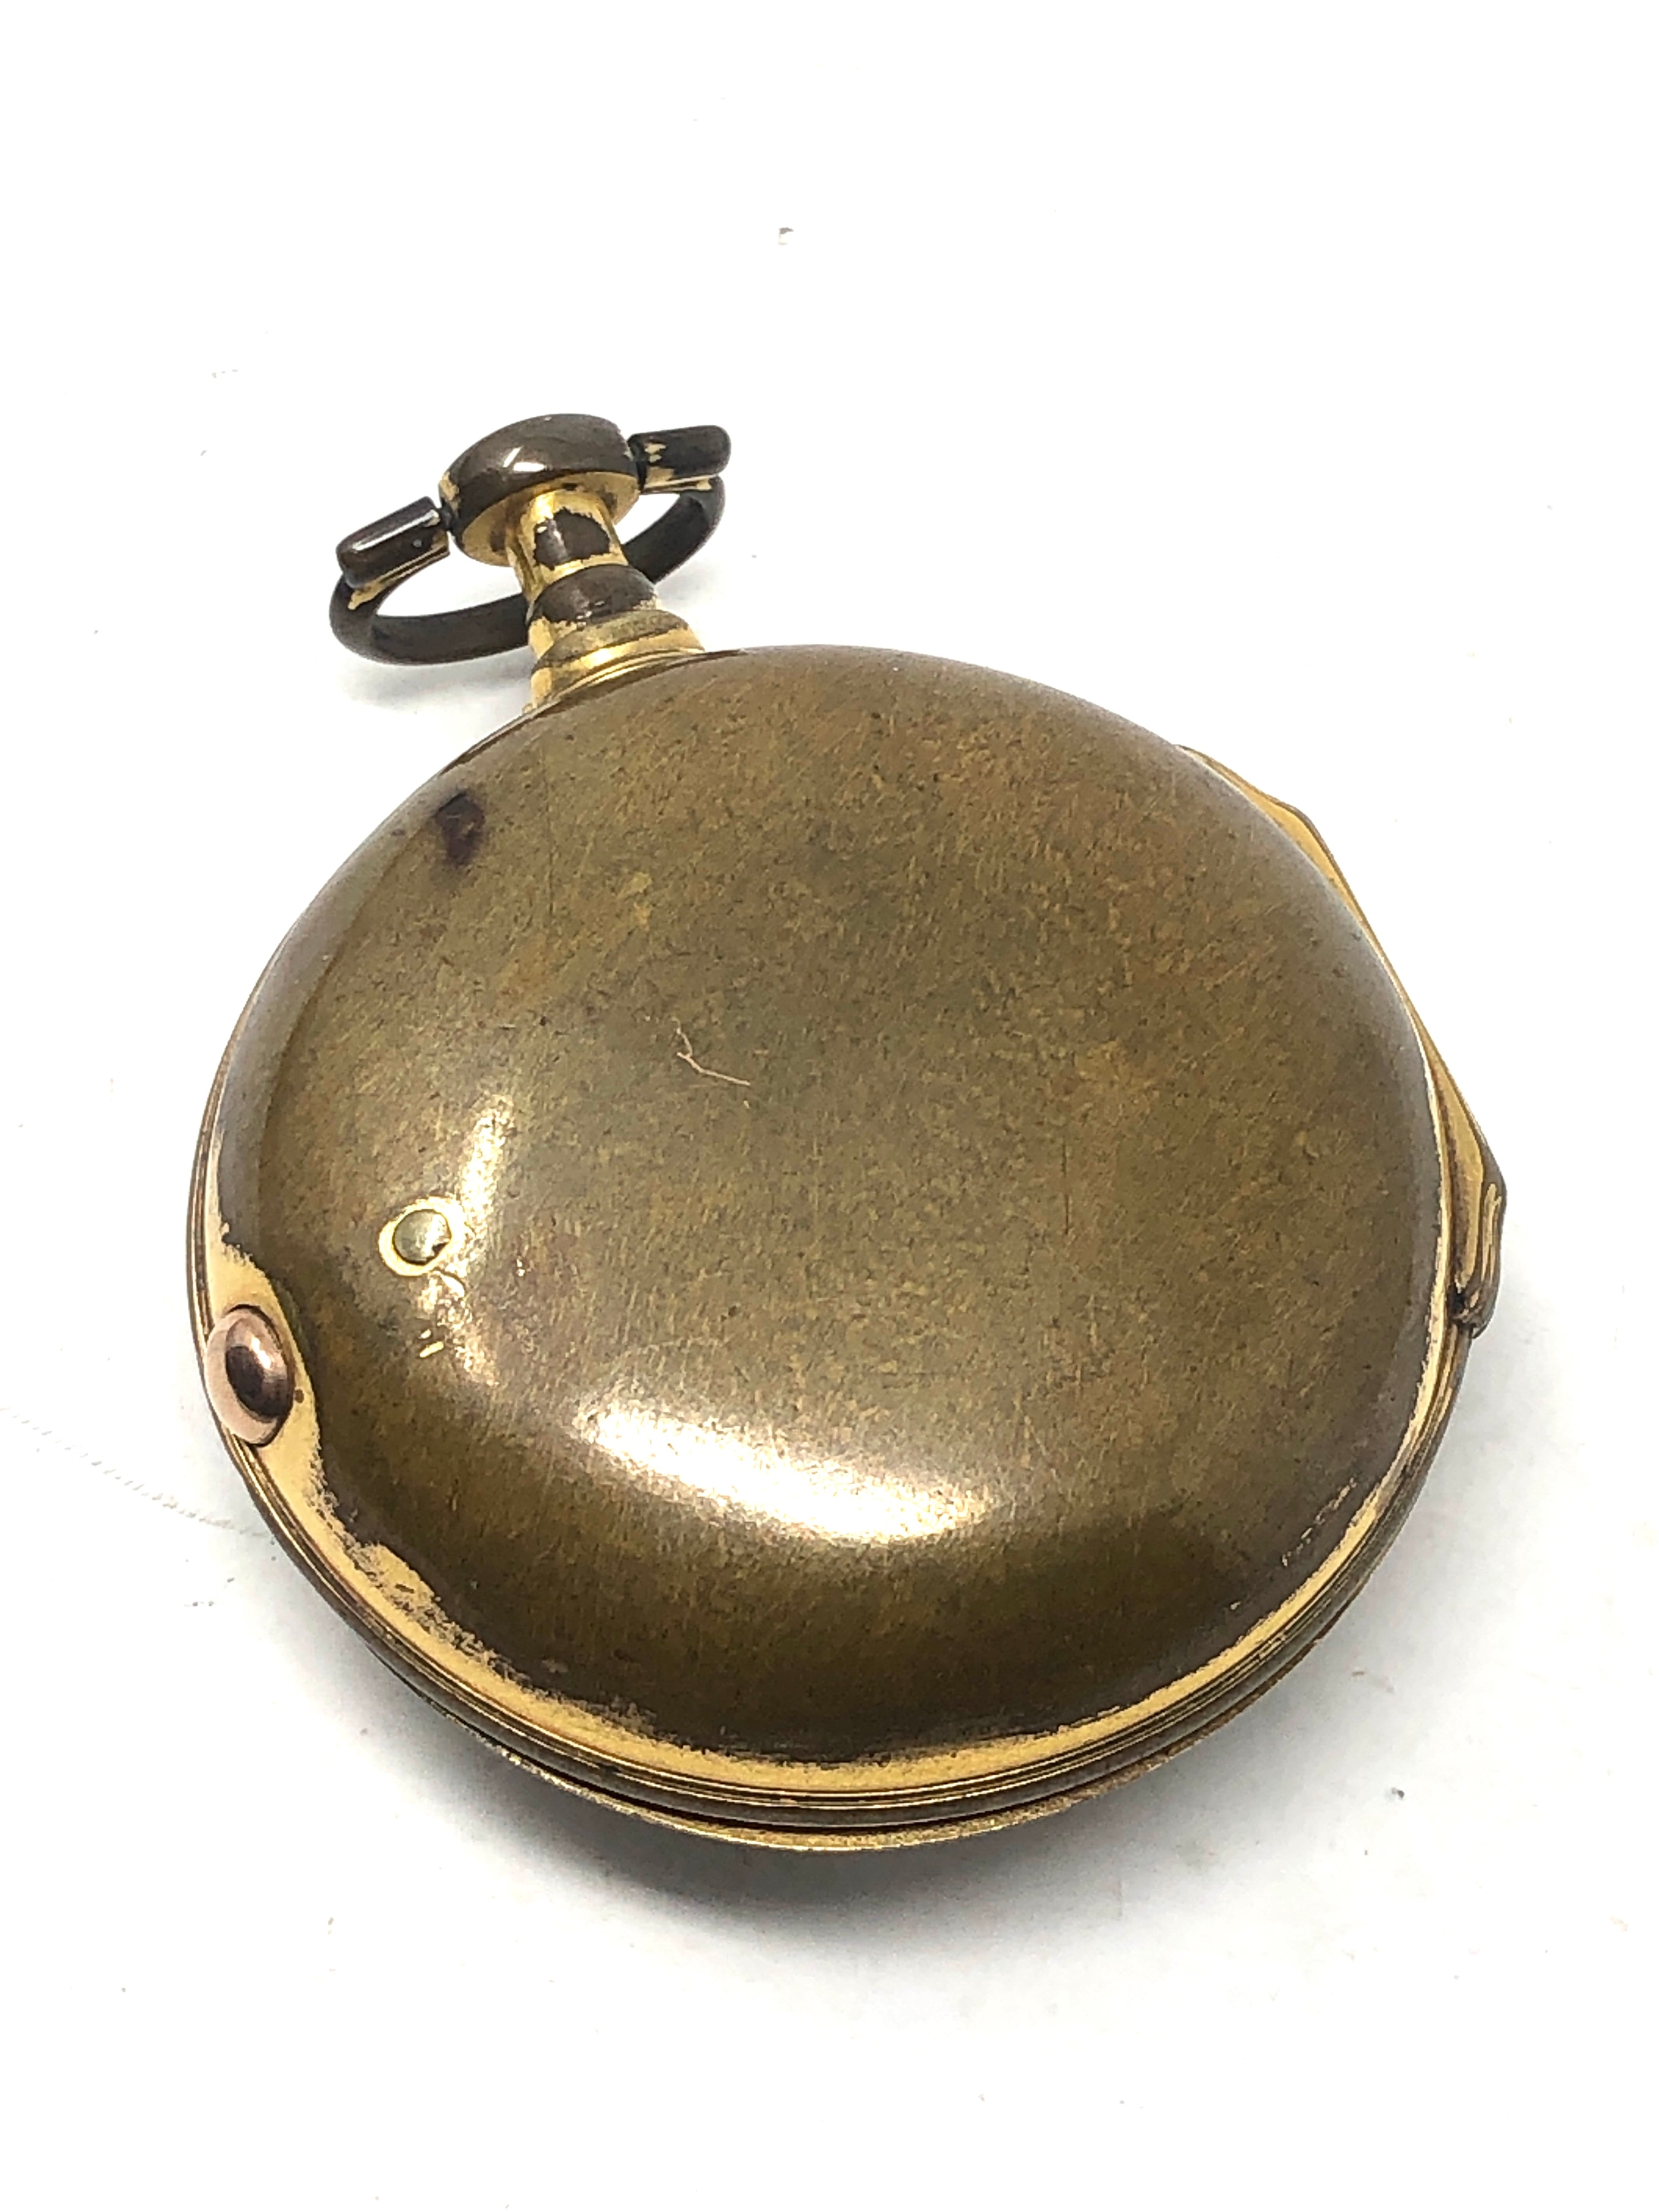 Antique gold plated fusee pair case pocket watch the watch is not ticking spares or repair case worn - Image 2 of 4